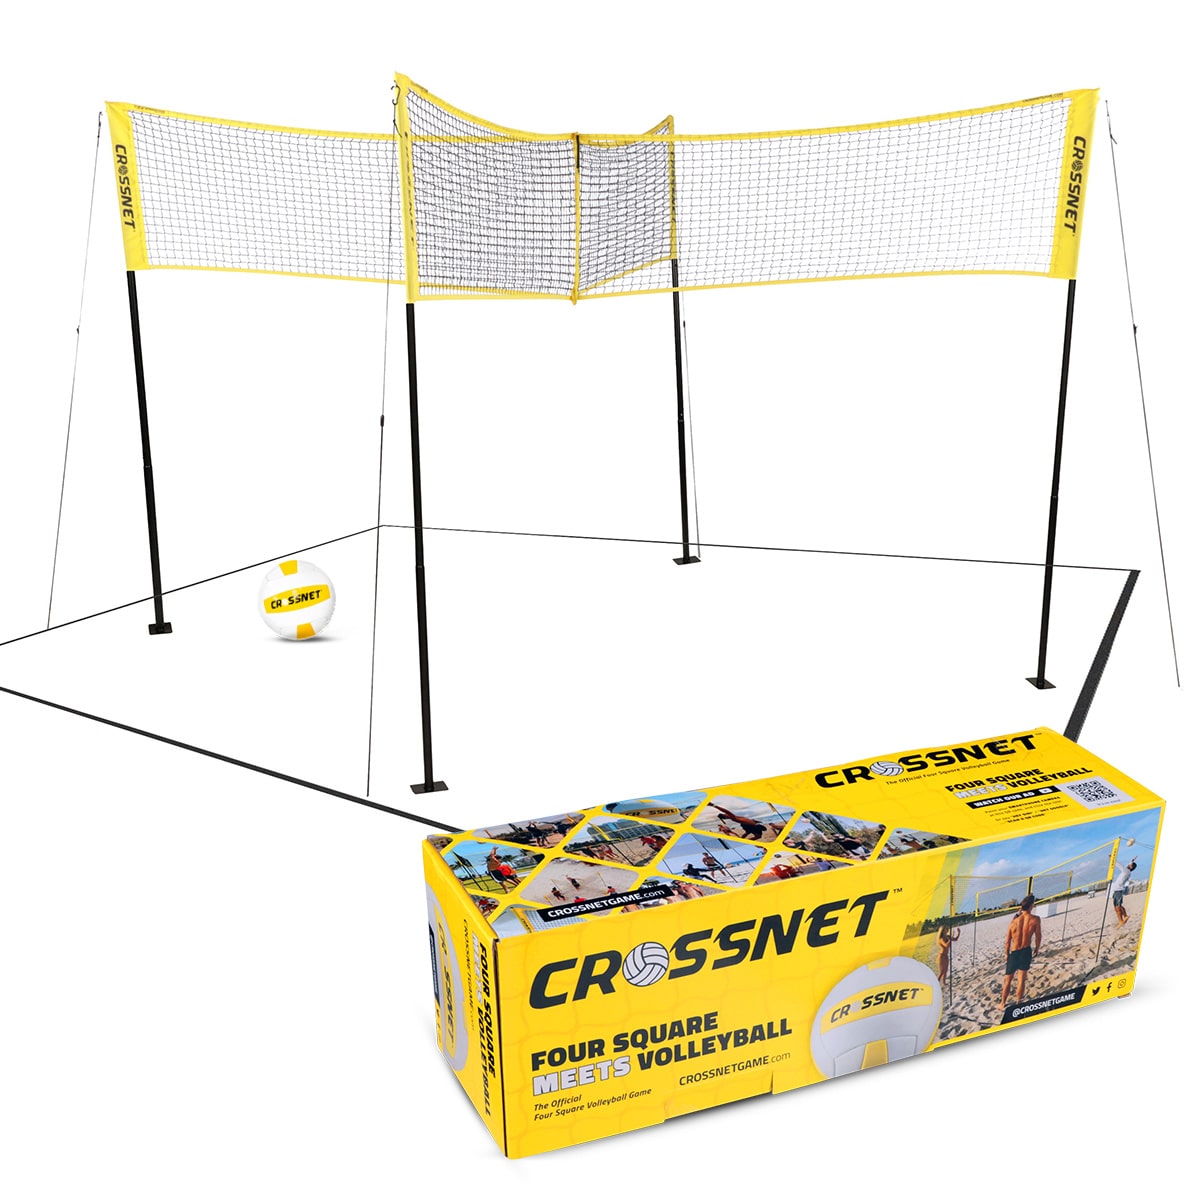 CROSSNET | Four Square Volleyball Net | Shop Direct & Save